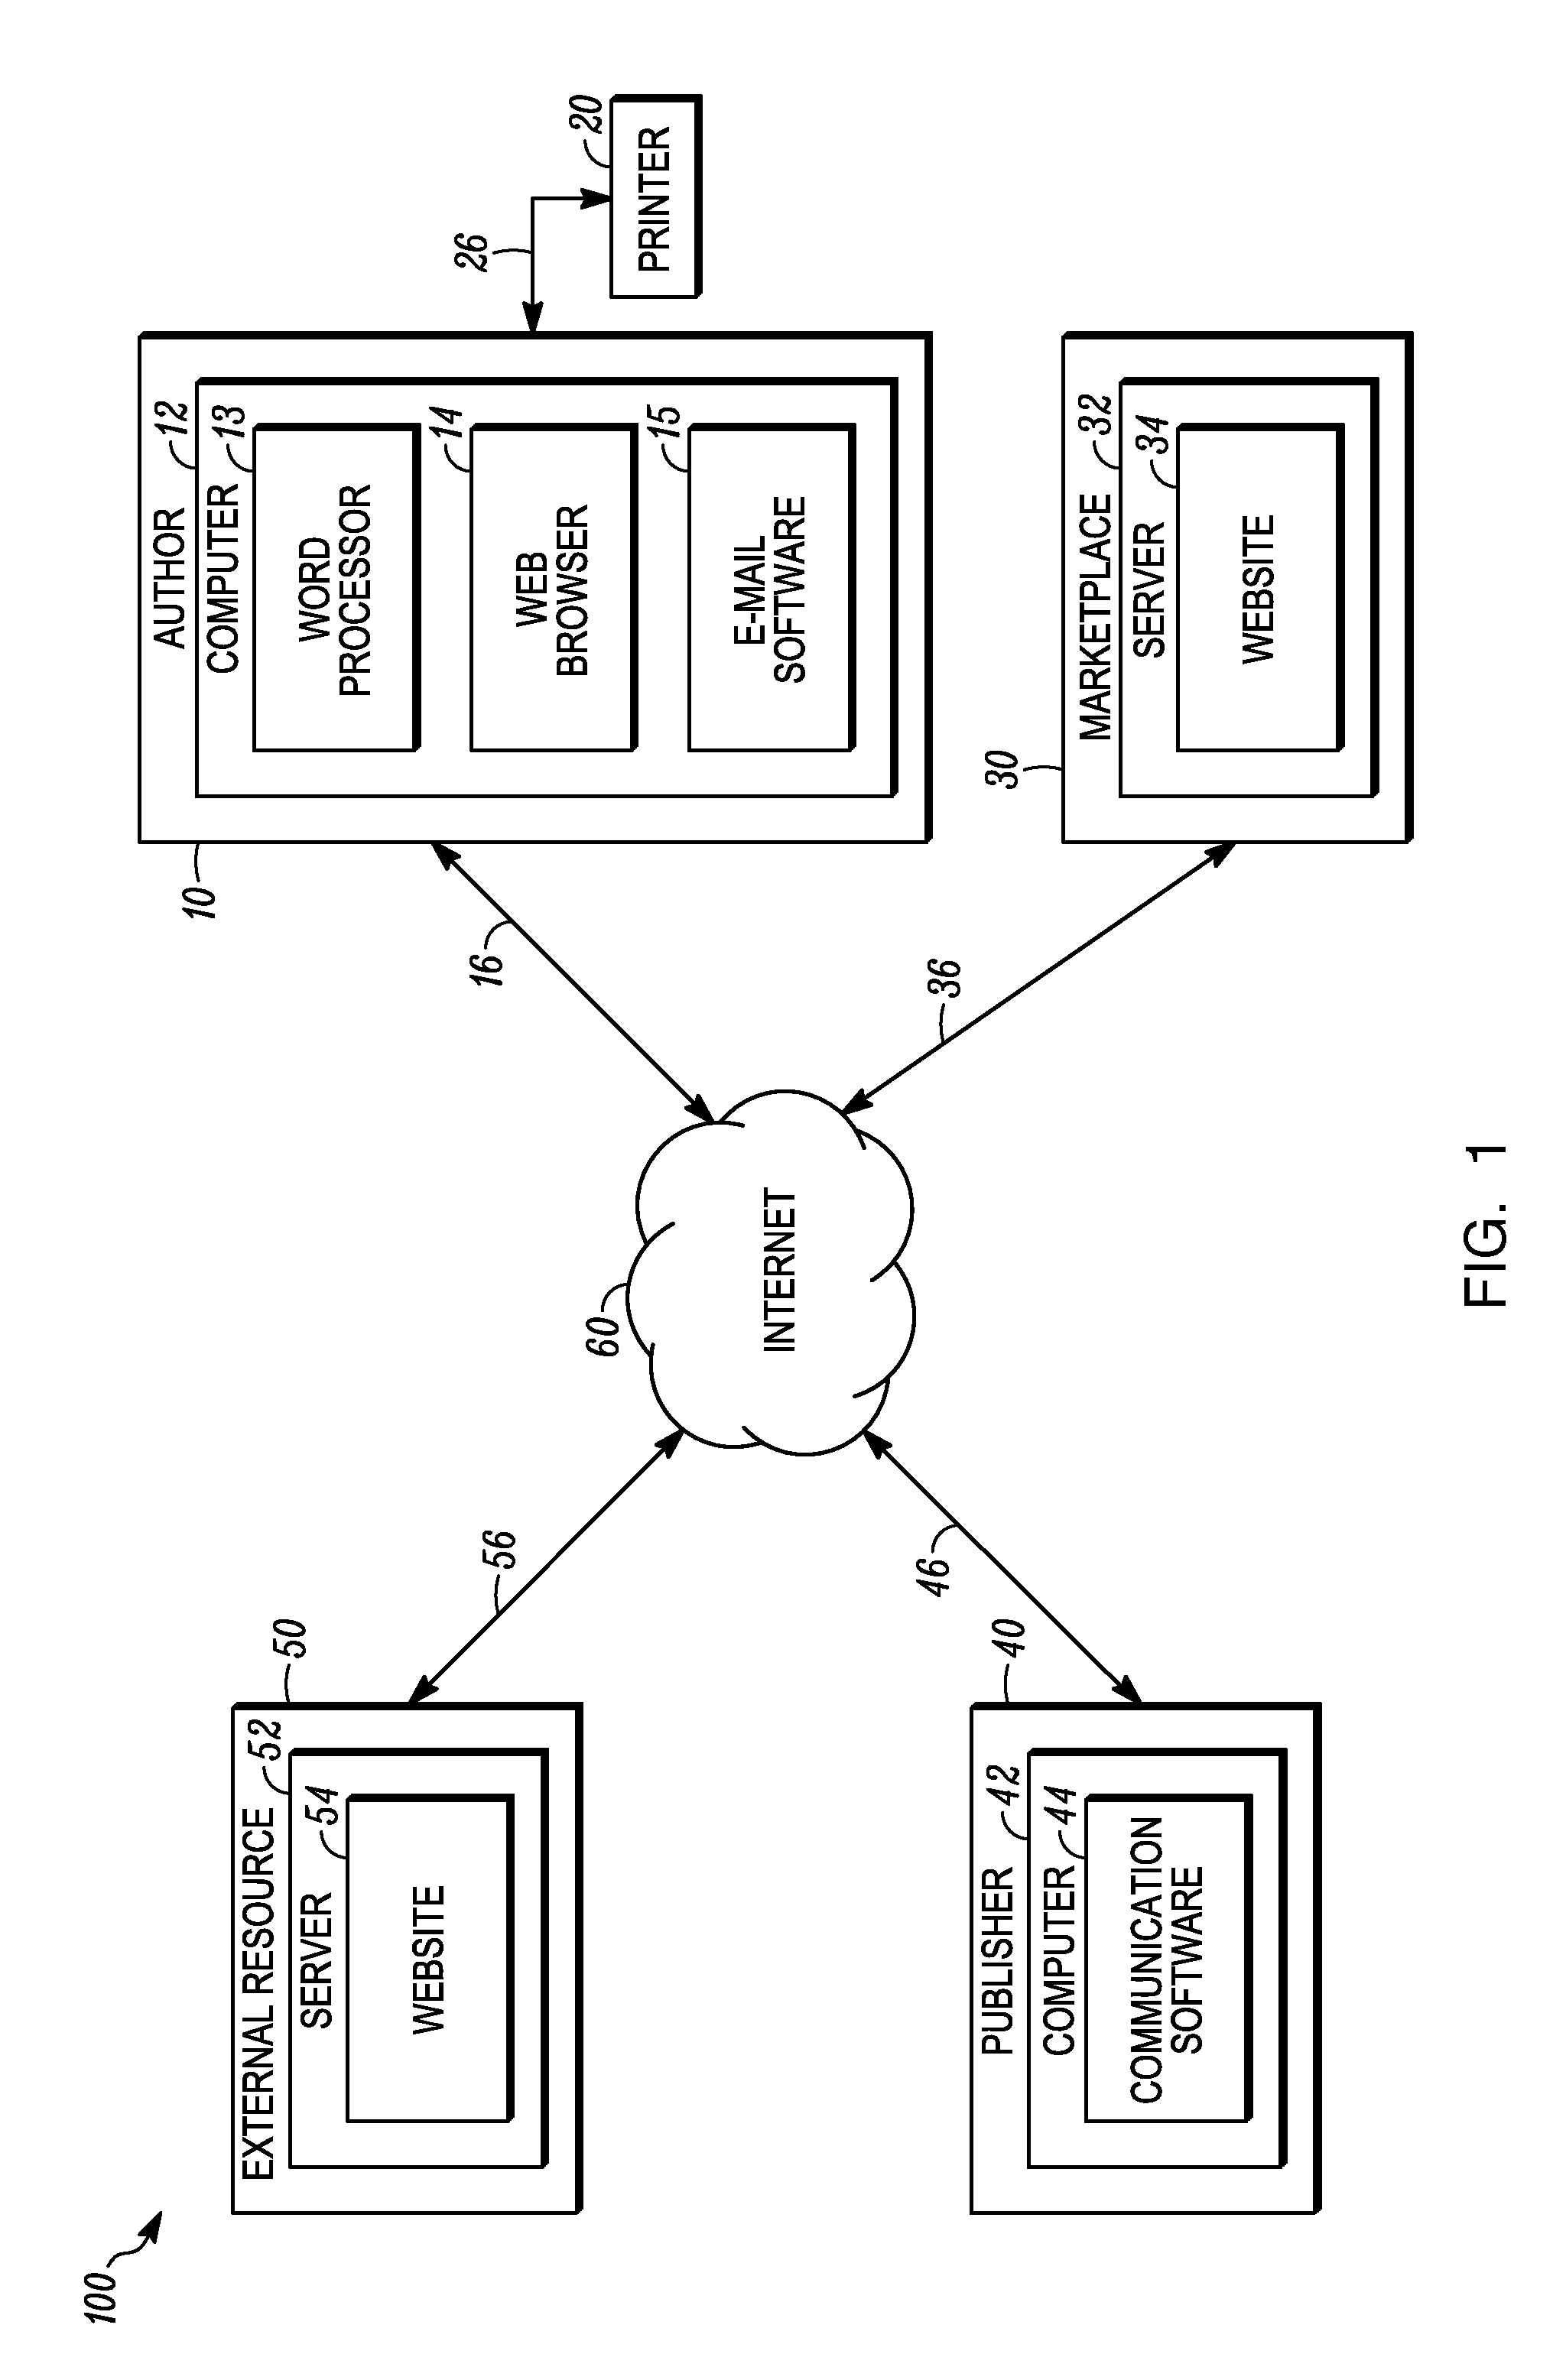 Method and system for checking the consistency of established facts within internal works